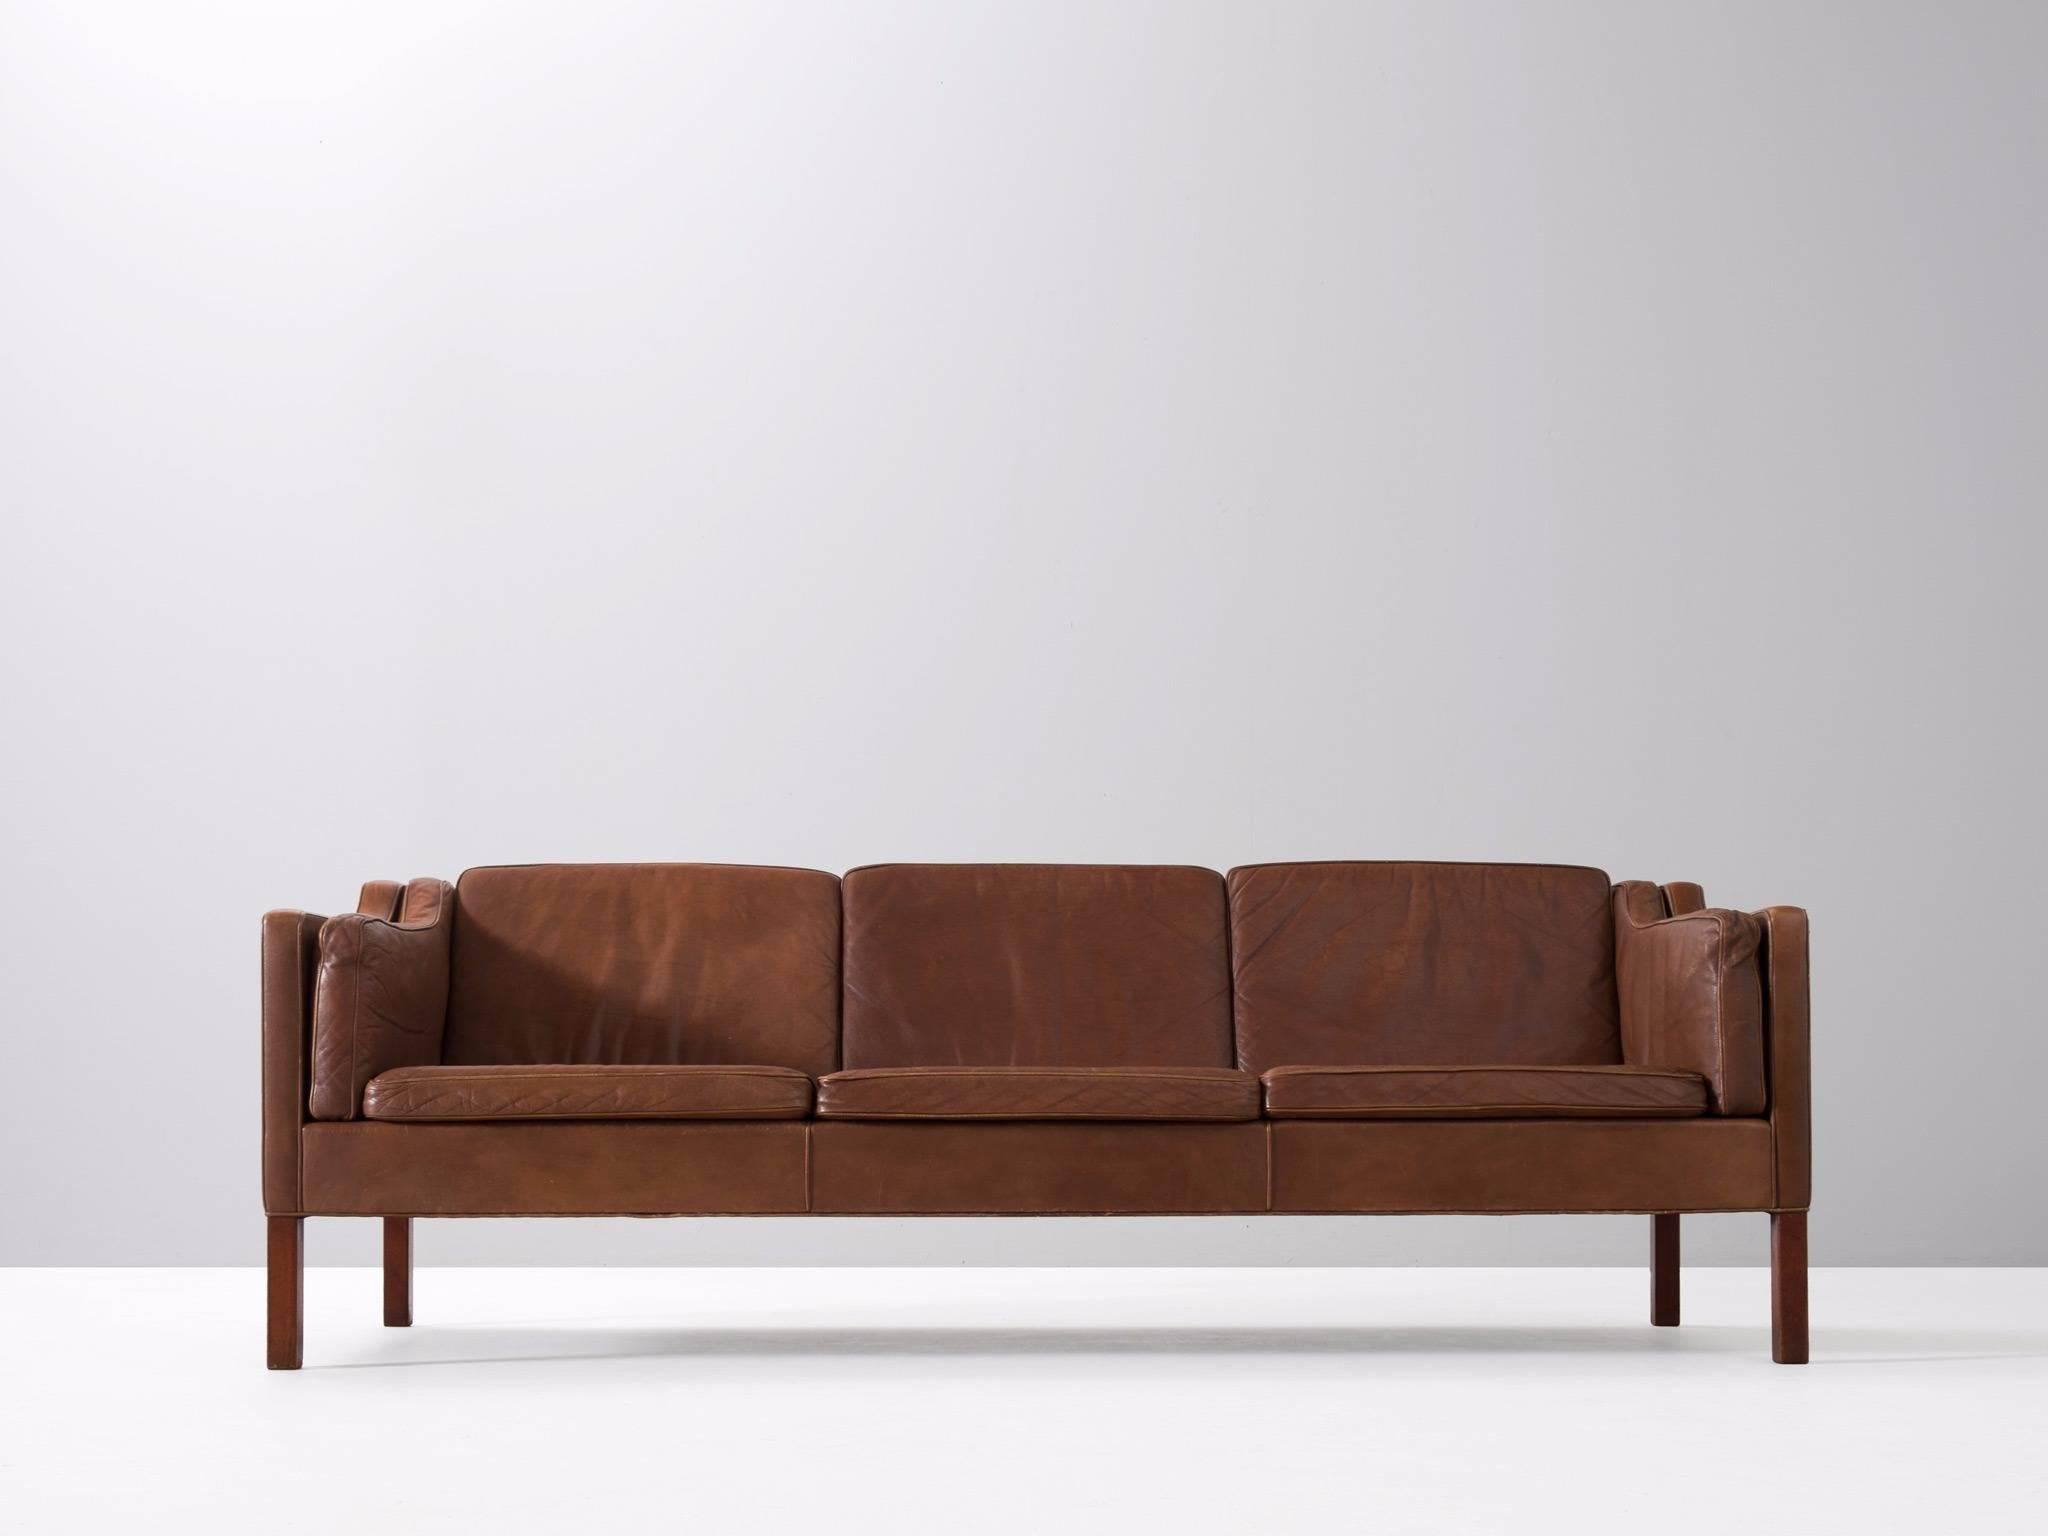 Three-seat sofa leather and oak, by Børge Mogensen for Fredericia Stolefabrik, Denmark 1962. 

Very well conditioned three-seat sofa from Børge Mogensen. This model was designed by Mogensen for his own home, in his goal to create the ultimate sofa.